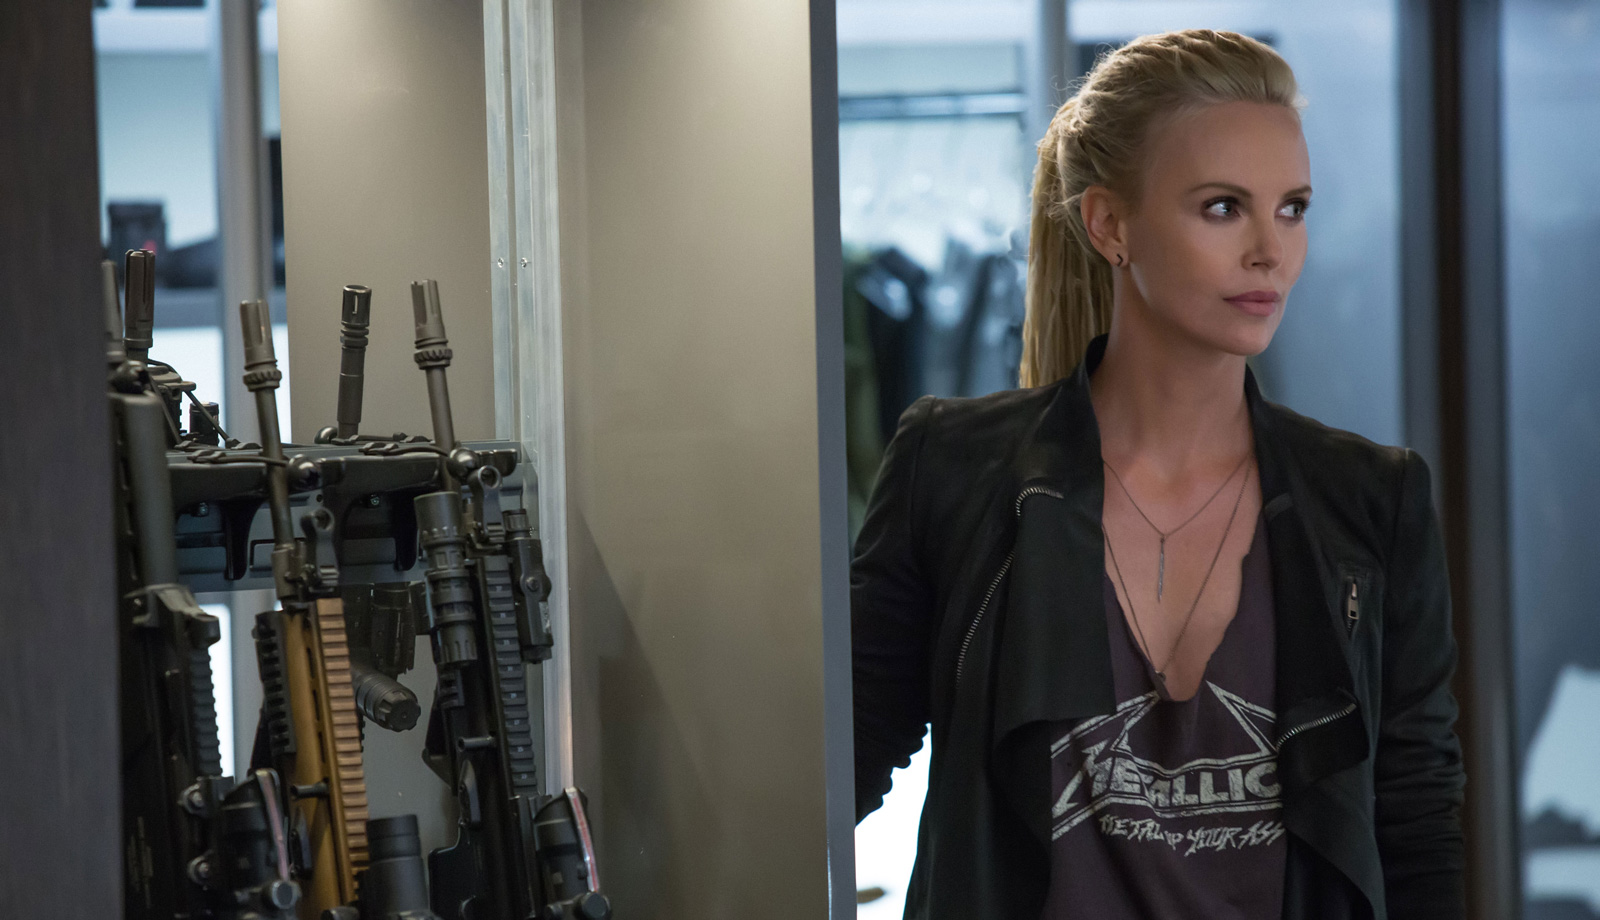 Charlize Theron Shares First Photos from Set of Fast X: 'She's Back